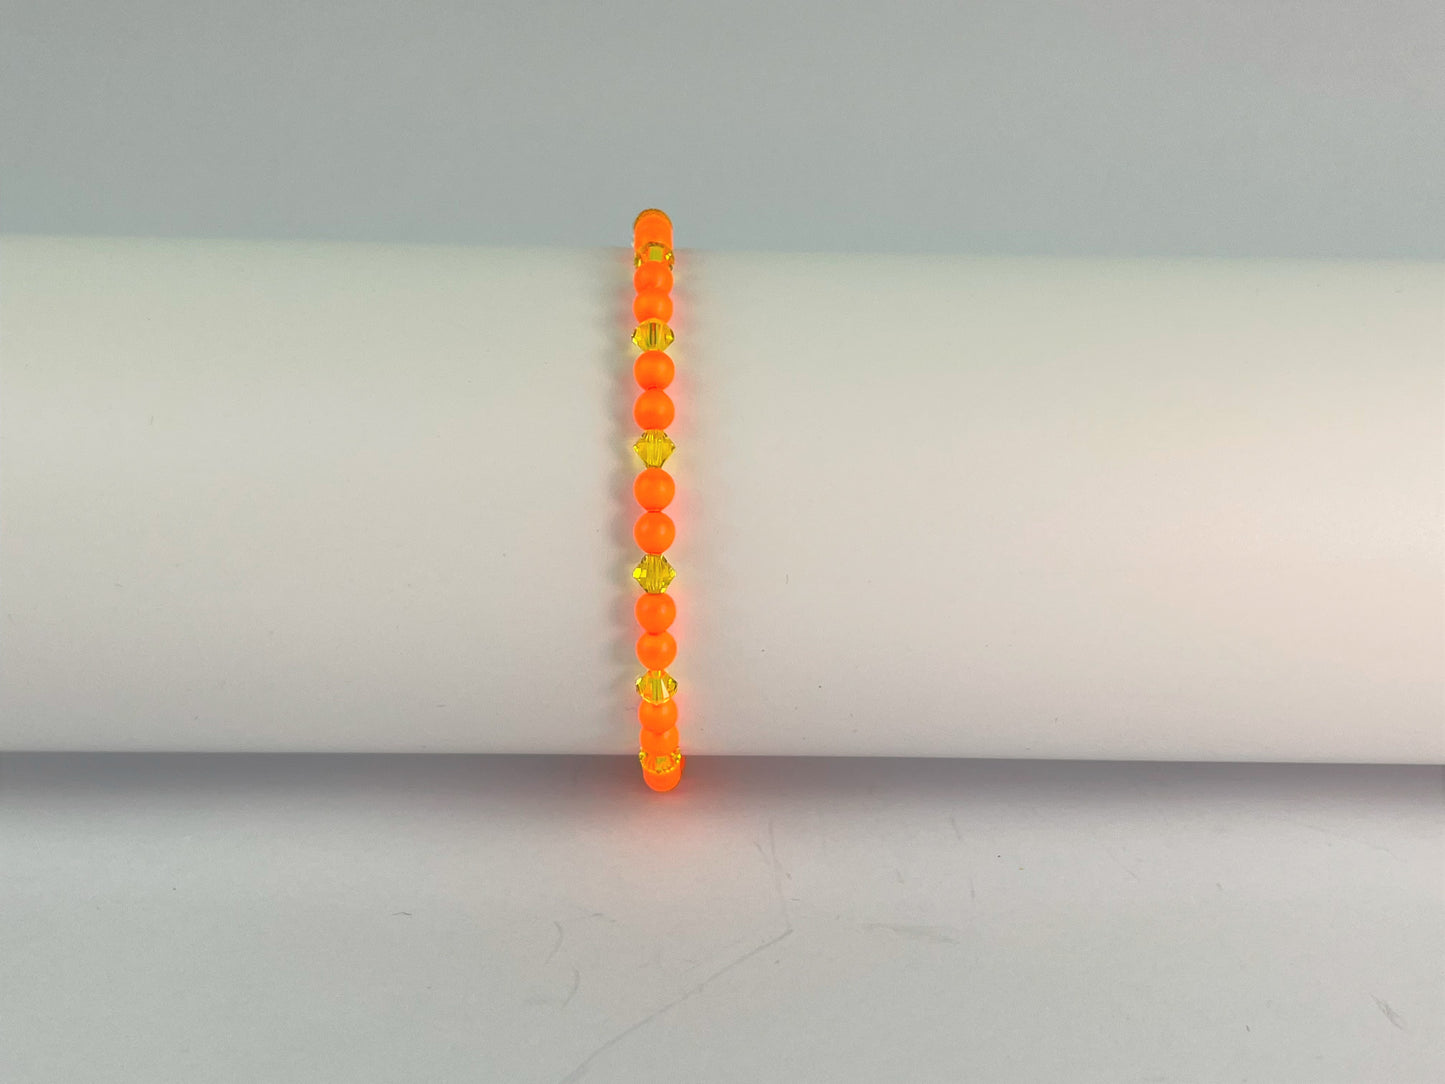 neon orange beads teamed with sunshine yellow crystals for this cute elasticated bracelet